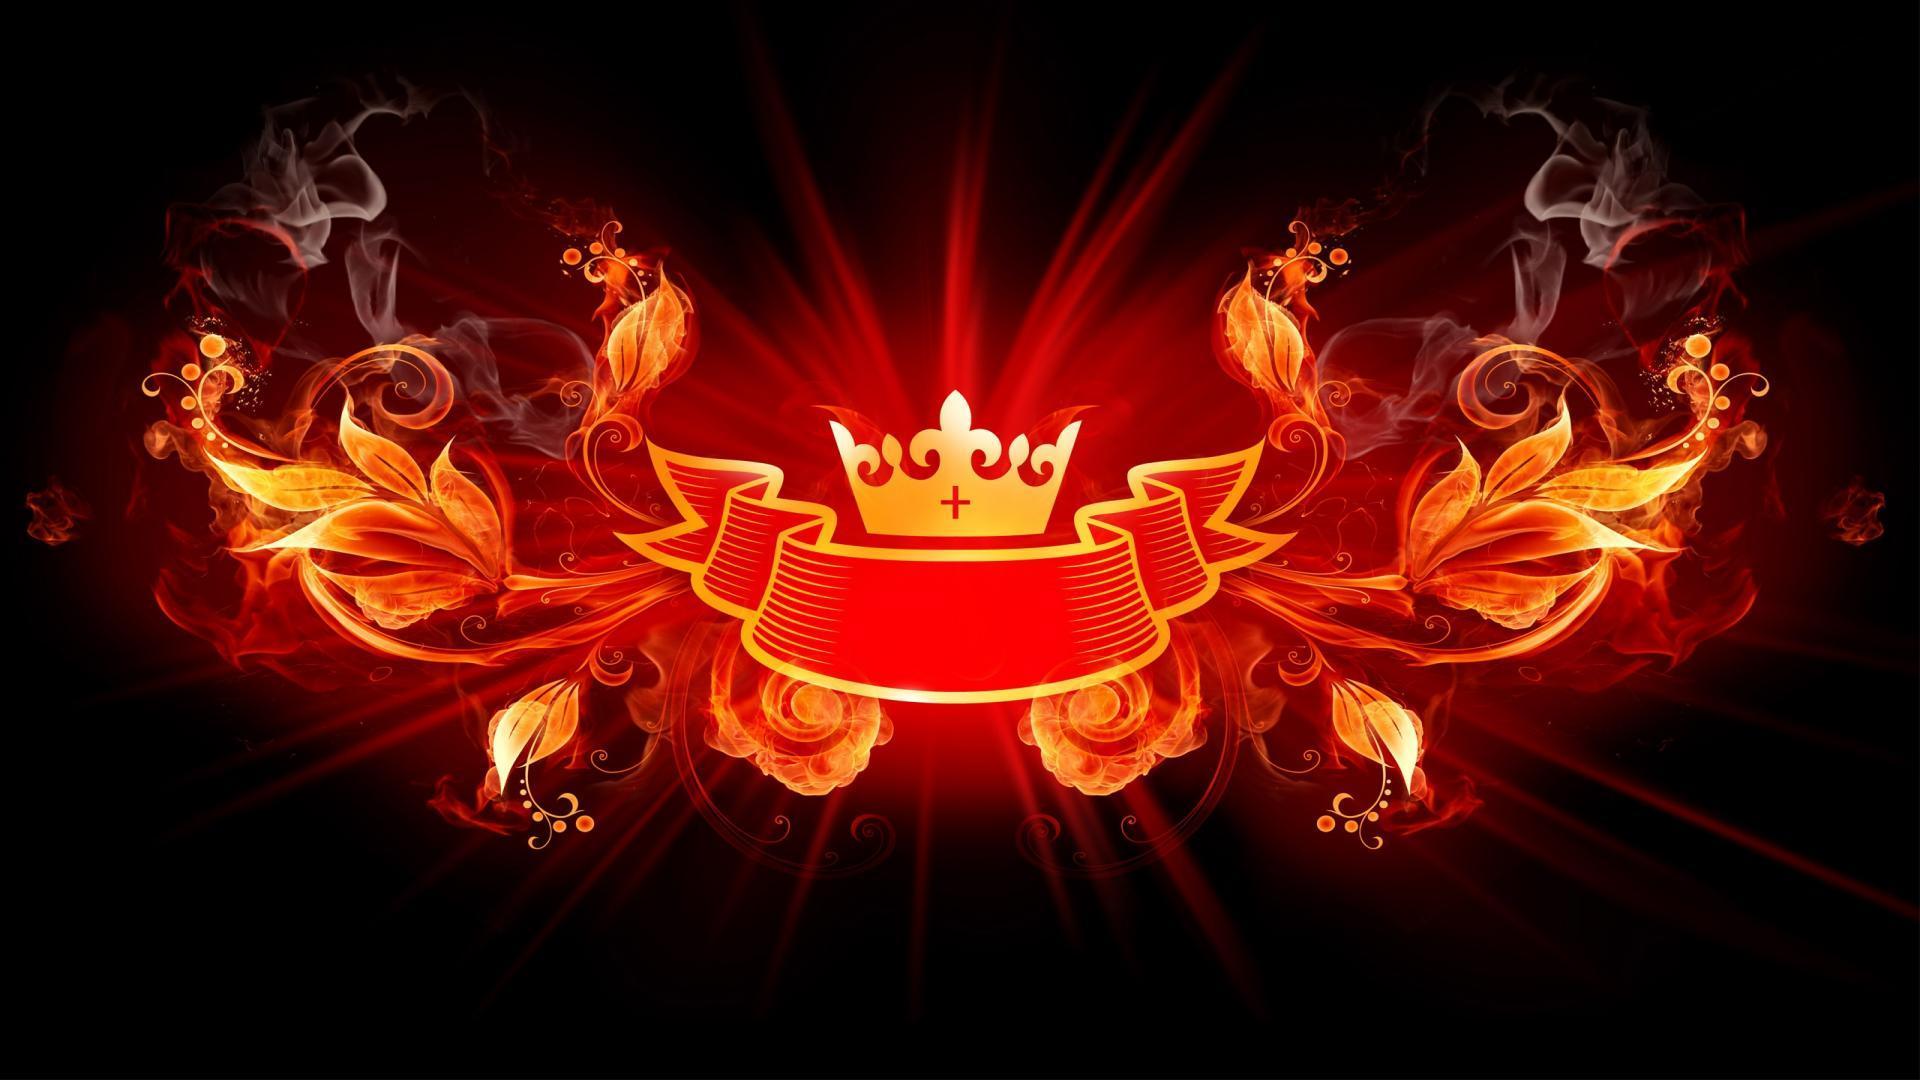 The Royal Crown Of Fire Wallpaper